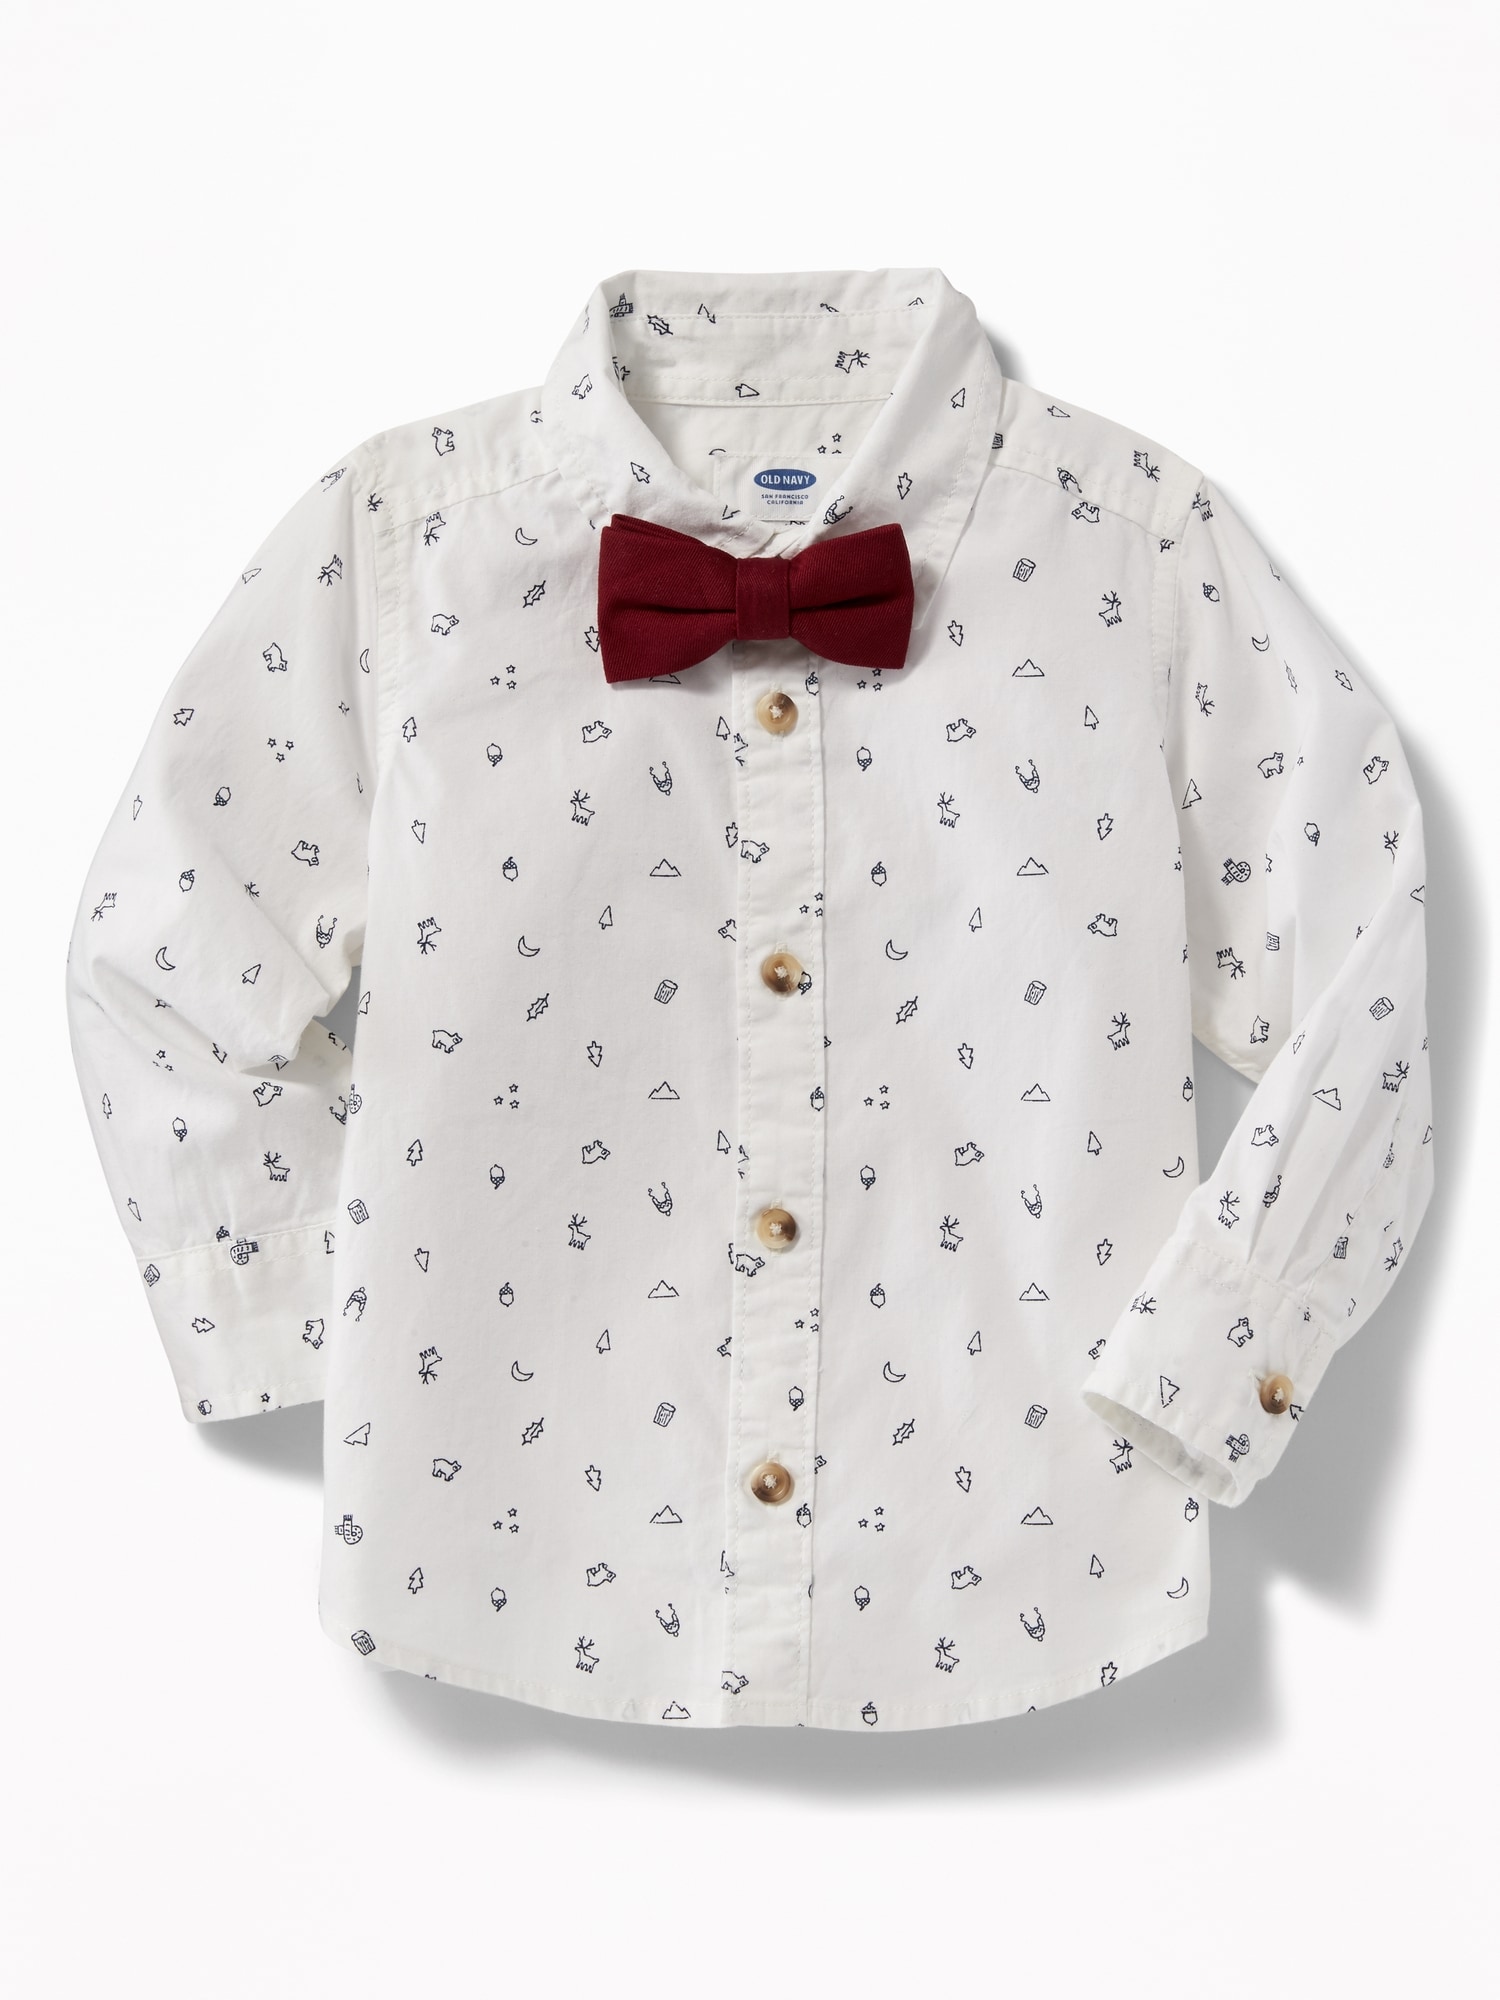 Printed Dress Shirt & Bow-Tie Set for Toddler Boys | Old Navy